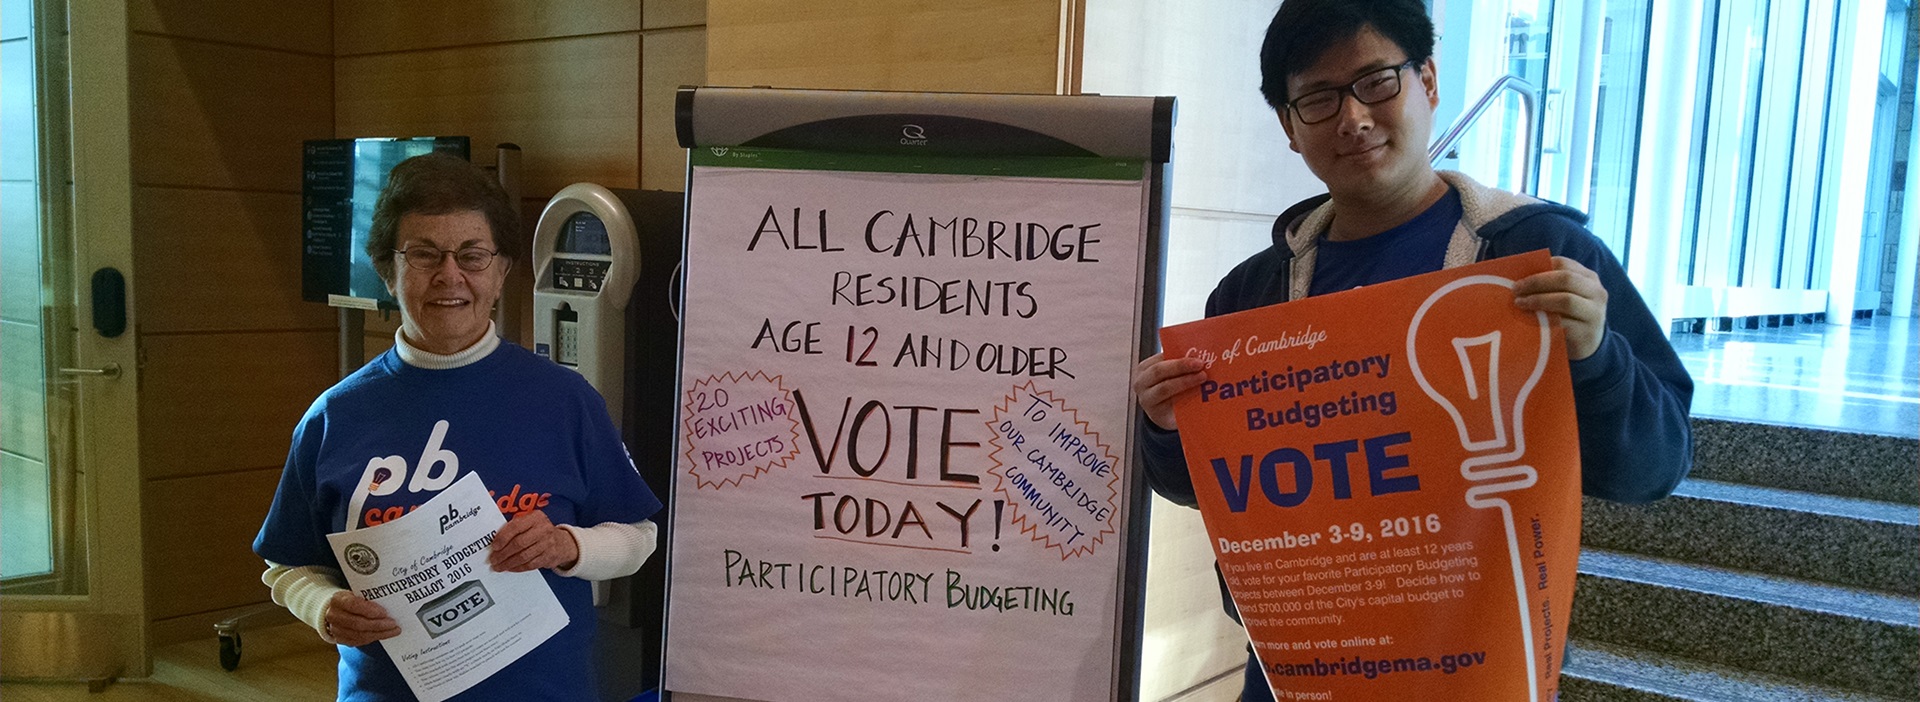 Volunteers for Participatory Budgeting Voting